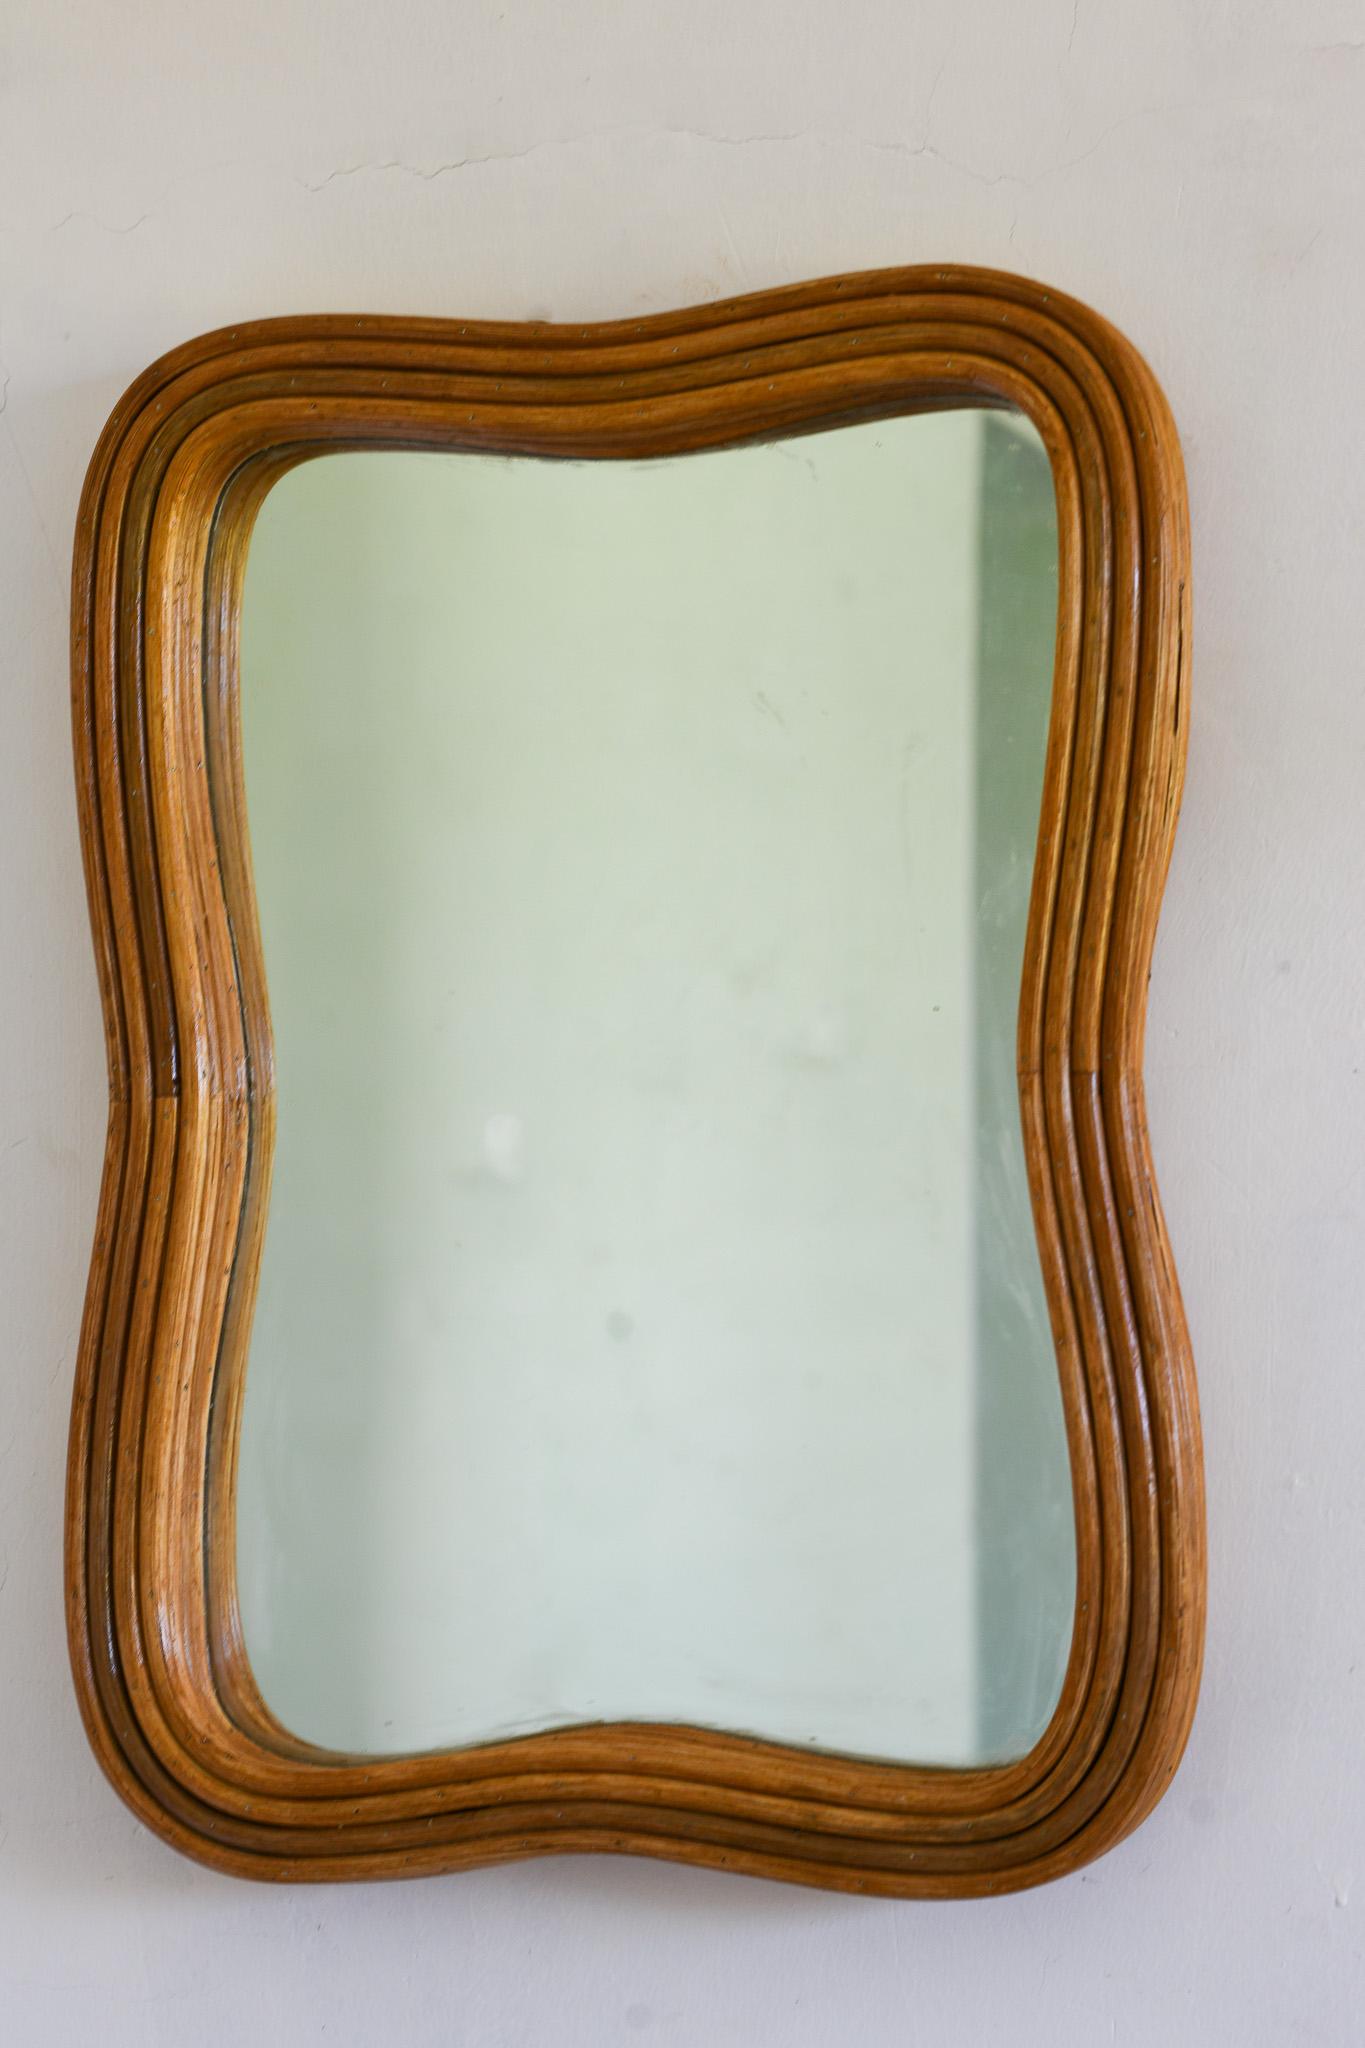 Rattan Pencil Reed Wall Mounted Mirror In Excellent Condition For Sale In Oxford, GB